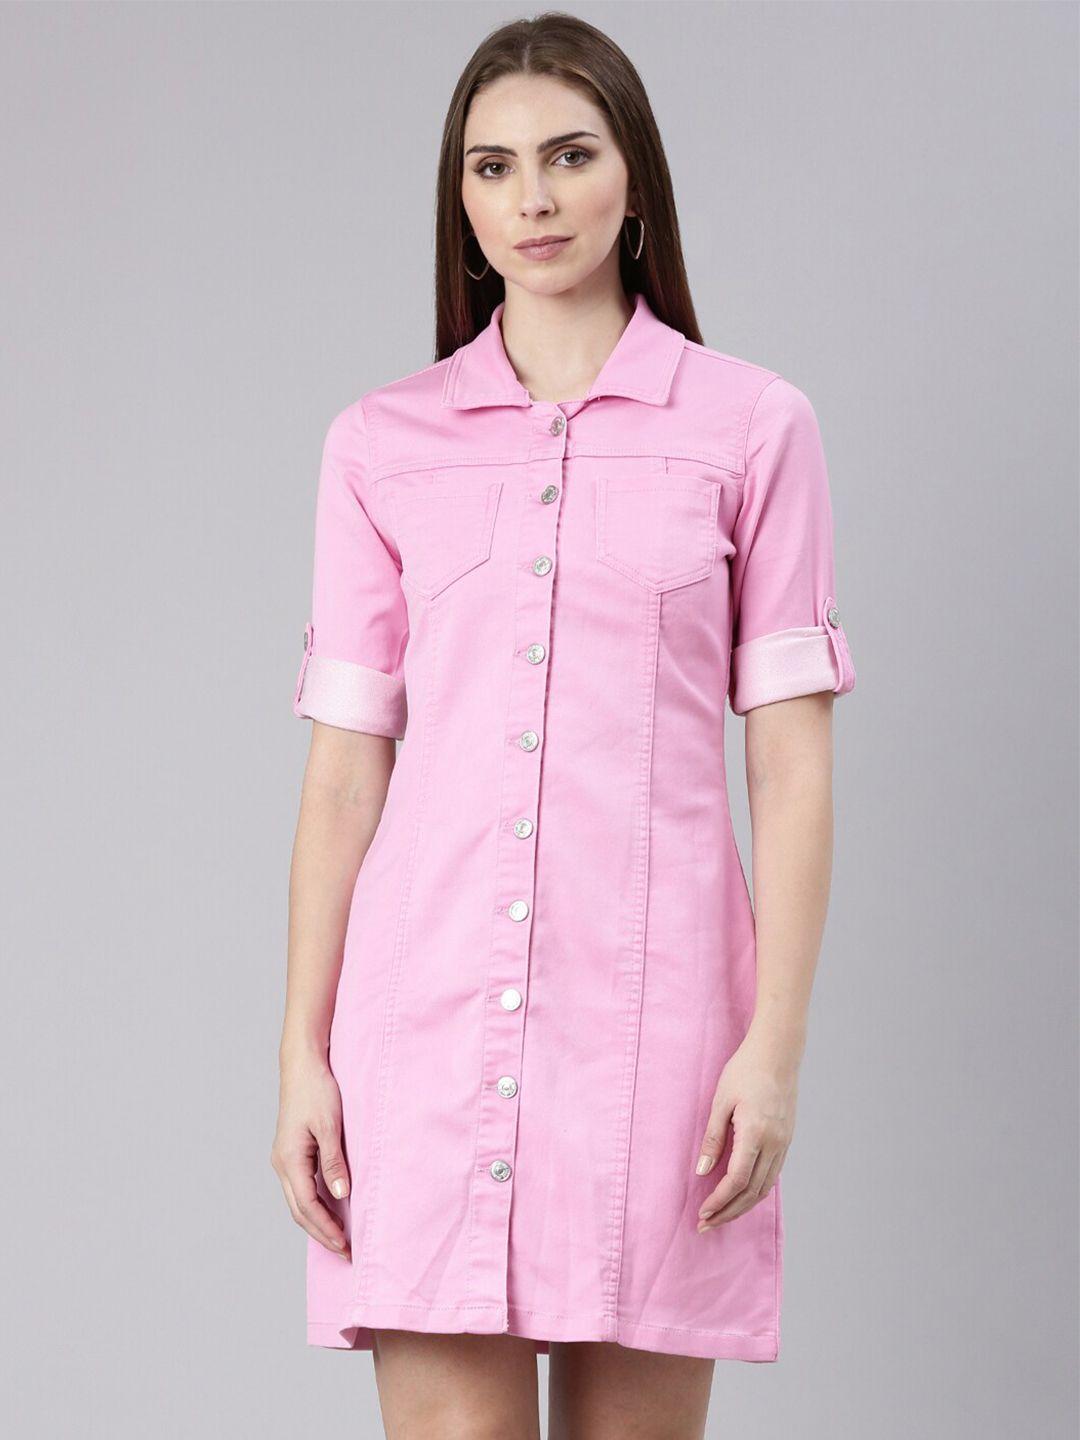 showoff roll up sleeves cotton shirt style dress